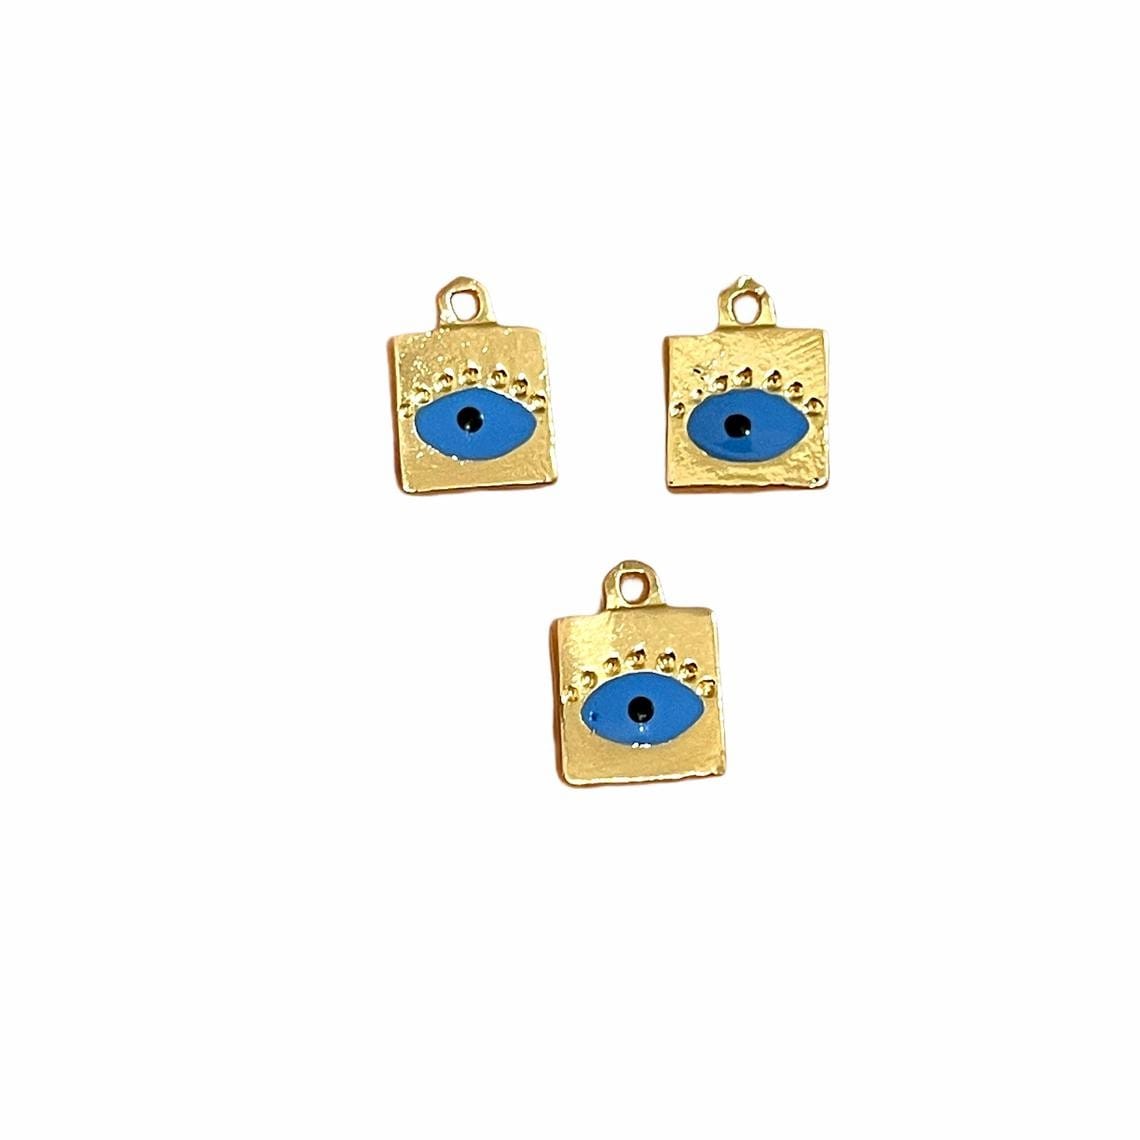 Gold Plated Square Evil Eye Eye Shaking Apparatus - Blue